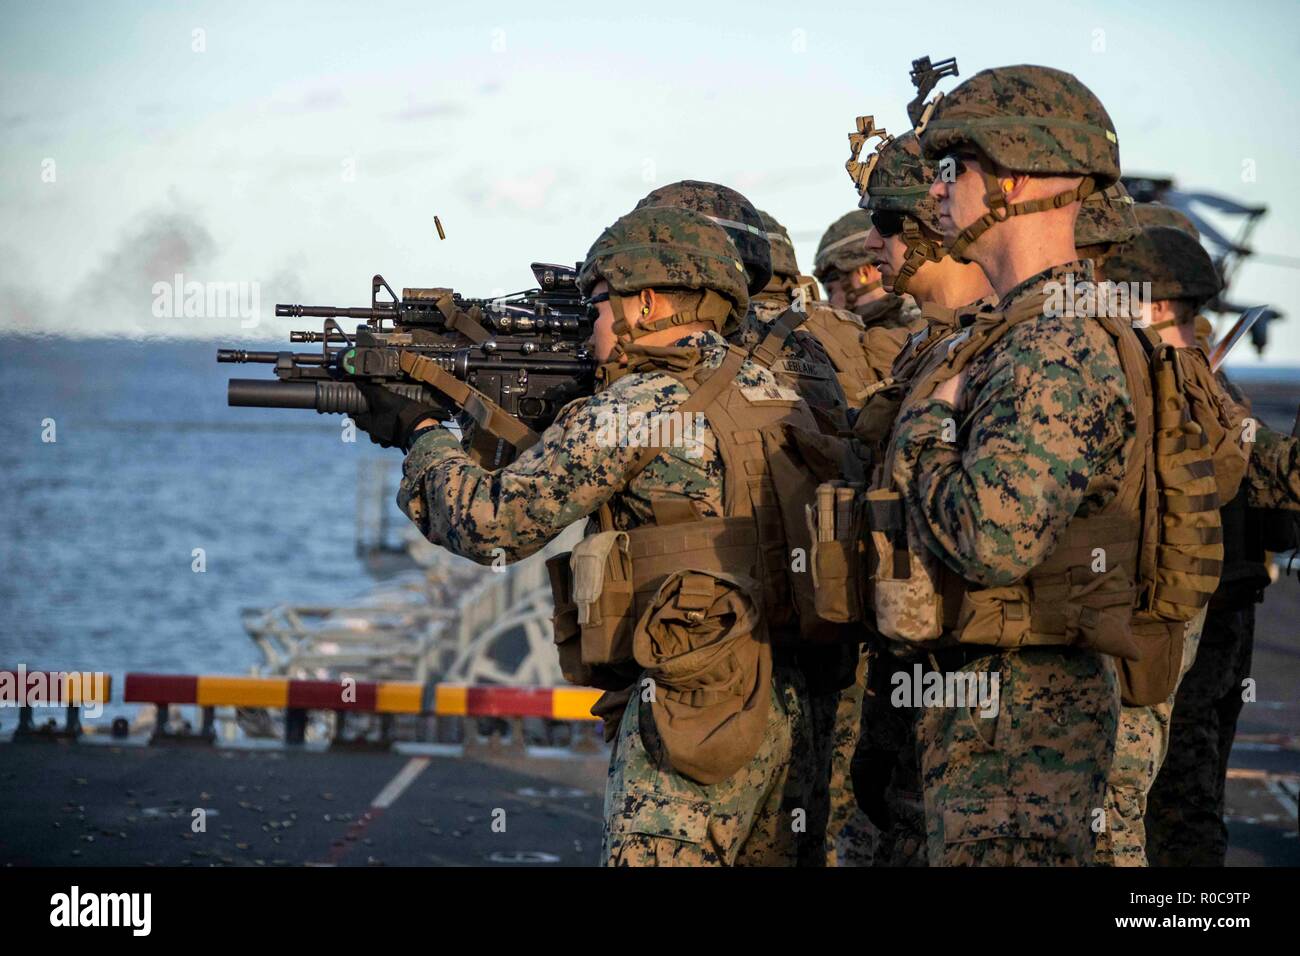 181022-N-KW492-0006 ATLANTIC OCEAN (Oct. 22, 2018) Marines assigned to the 22nd Marine Expeditionary Unit (MEU) conduct a live-fire exercise on the flight deck of the Wasp-class amphibious assault ship USS Kearsarge (LHD3) during the Carrier Strike Group (CSG) 4 composite training unit exercise (COMPTUEX). COMPTUEX is the final pre-deployment exercise that certifies the combined Kearsarge Amphibious Ready Group's and 22nd MEU's abilities to conduct military operations at sea and project power ashore through joint planning and execution of challenging and realistic training scenarios. CSG 4 men Stock Photo